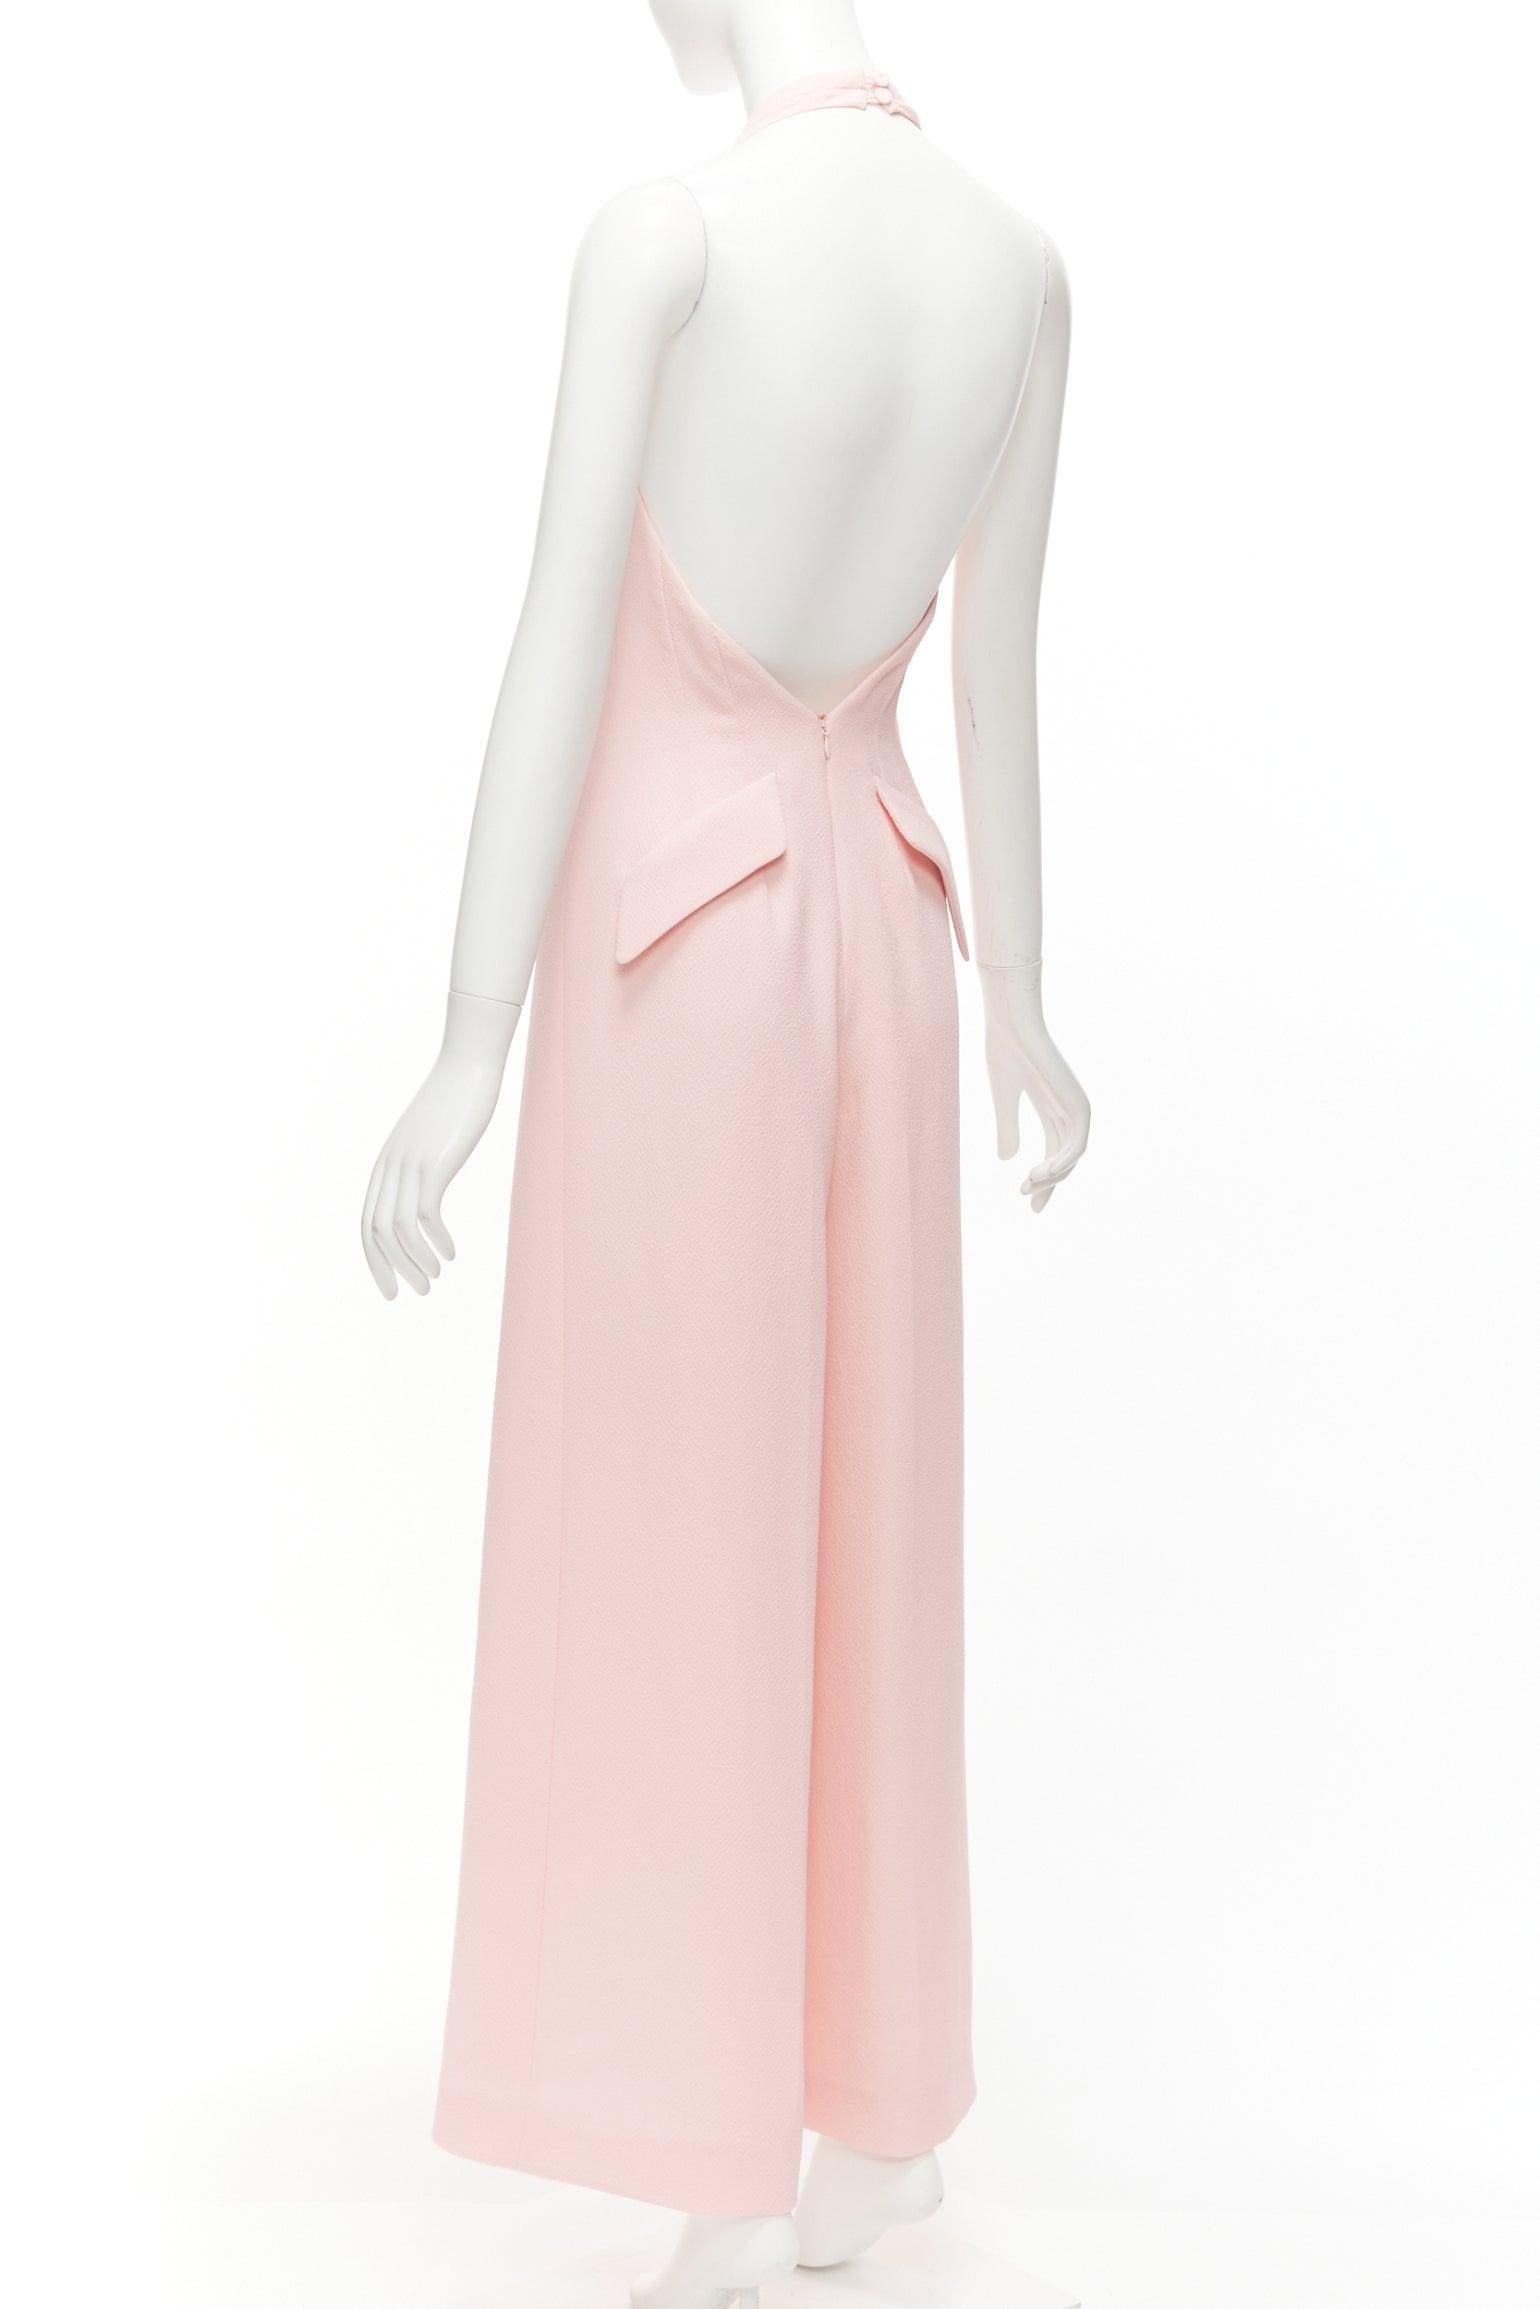 EMILIA WICKSTEAD Sabryn pink pleated front flap back halter wide jumpsuit UK8 S
Reference: LNKO/A02333
Brand: Emilia Wickstead
Model: Sabryn
Material: Polyester, Blend
Color: Pink
Pattern: Solid
Closure: Zip
Lining: White Fabric
Extra Details: